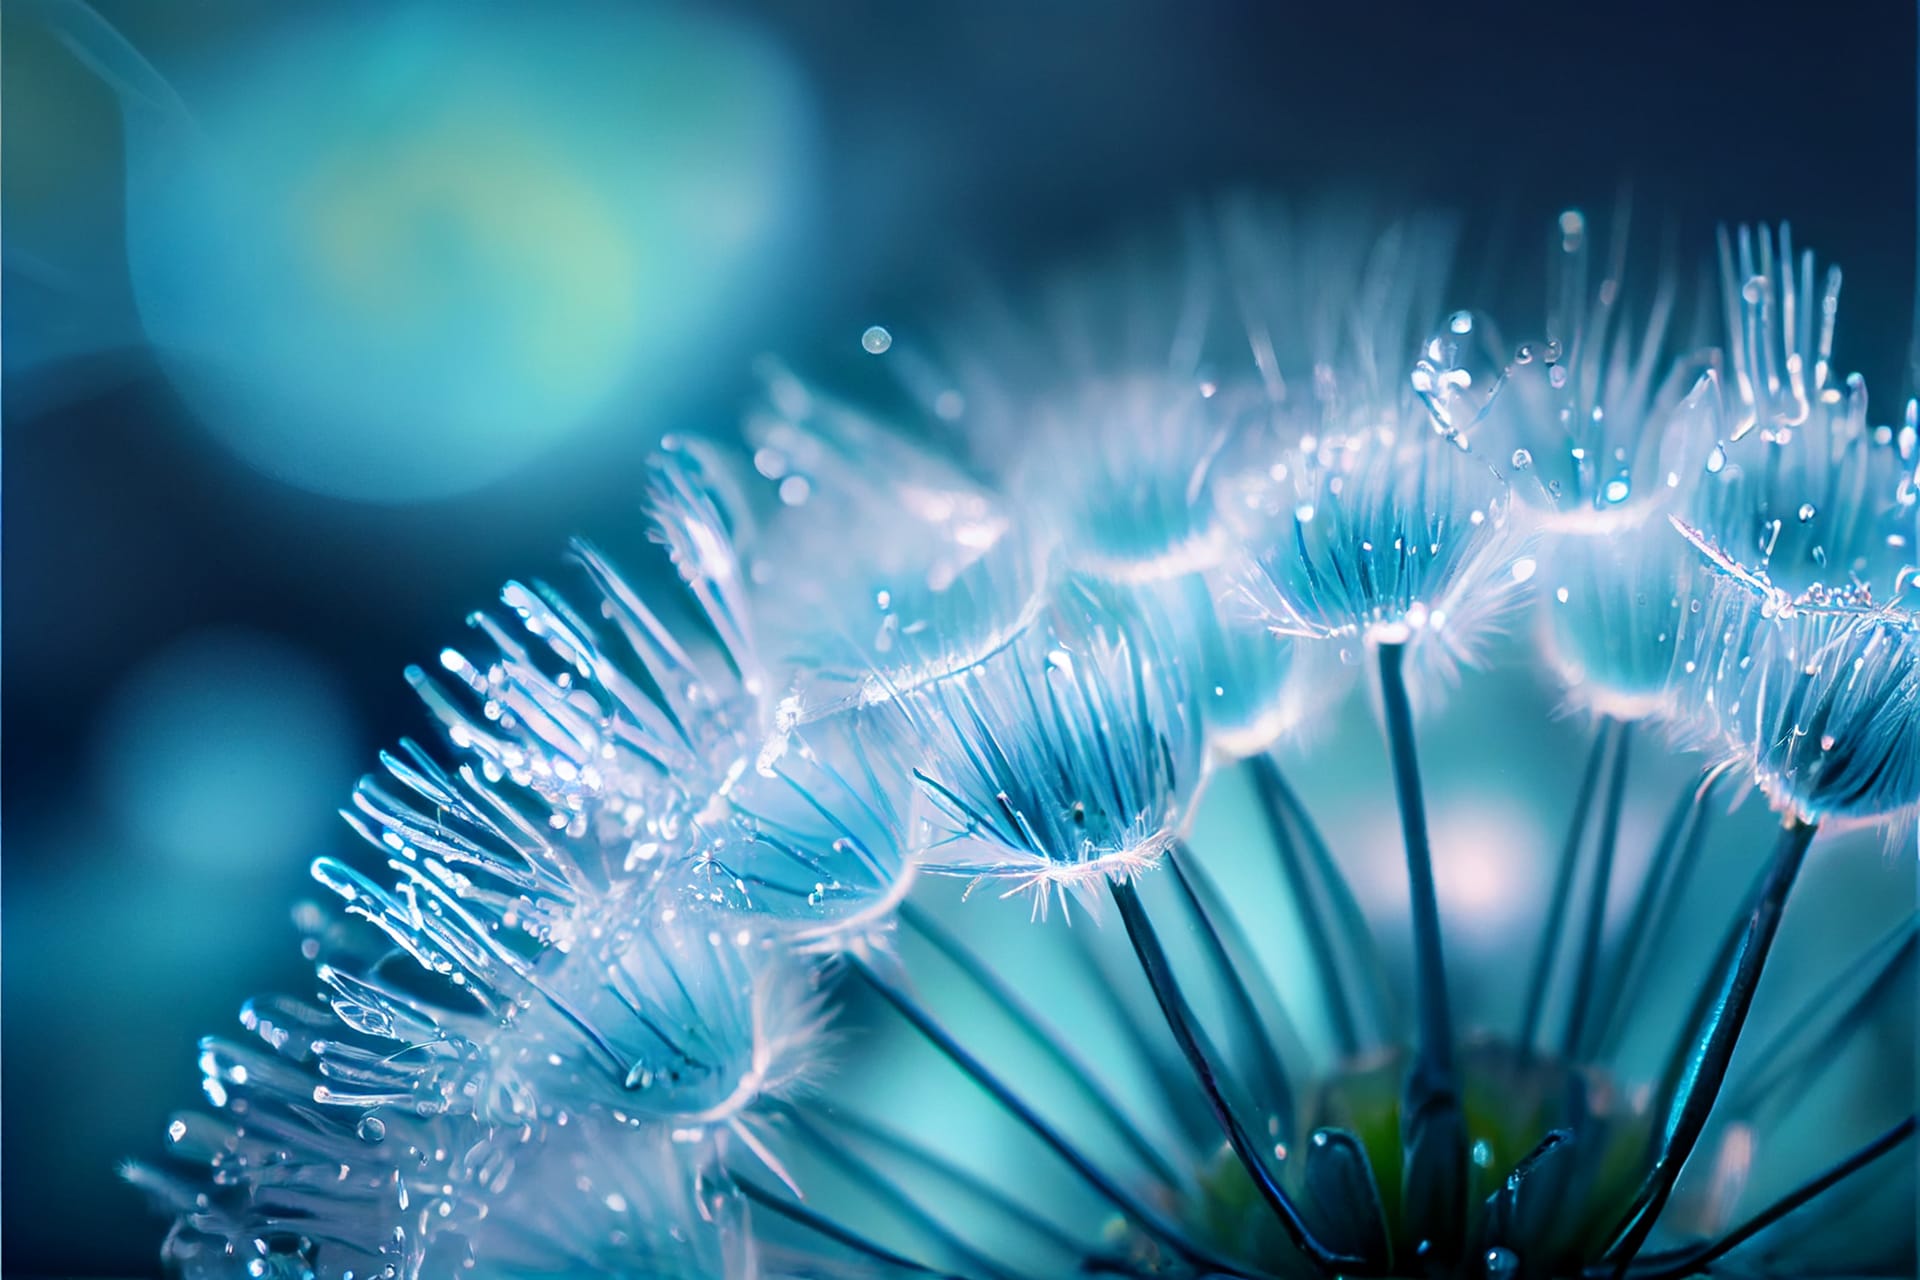 Dandelion seeds droplets water blue turquoise beautiful flower profile pic